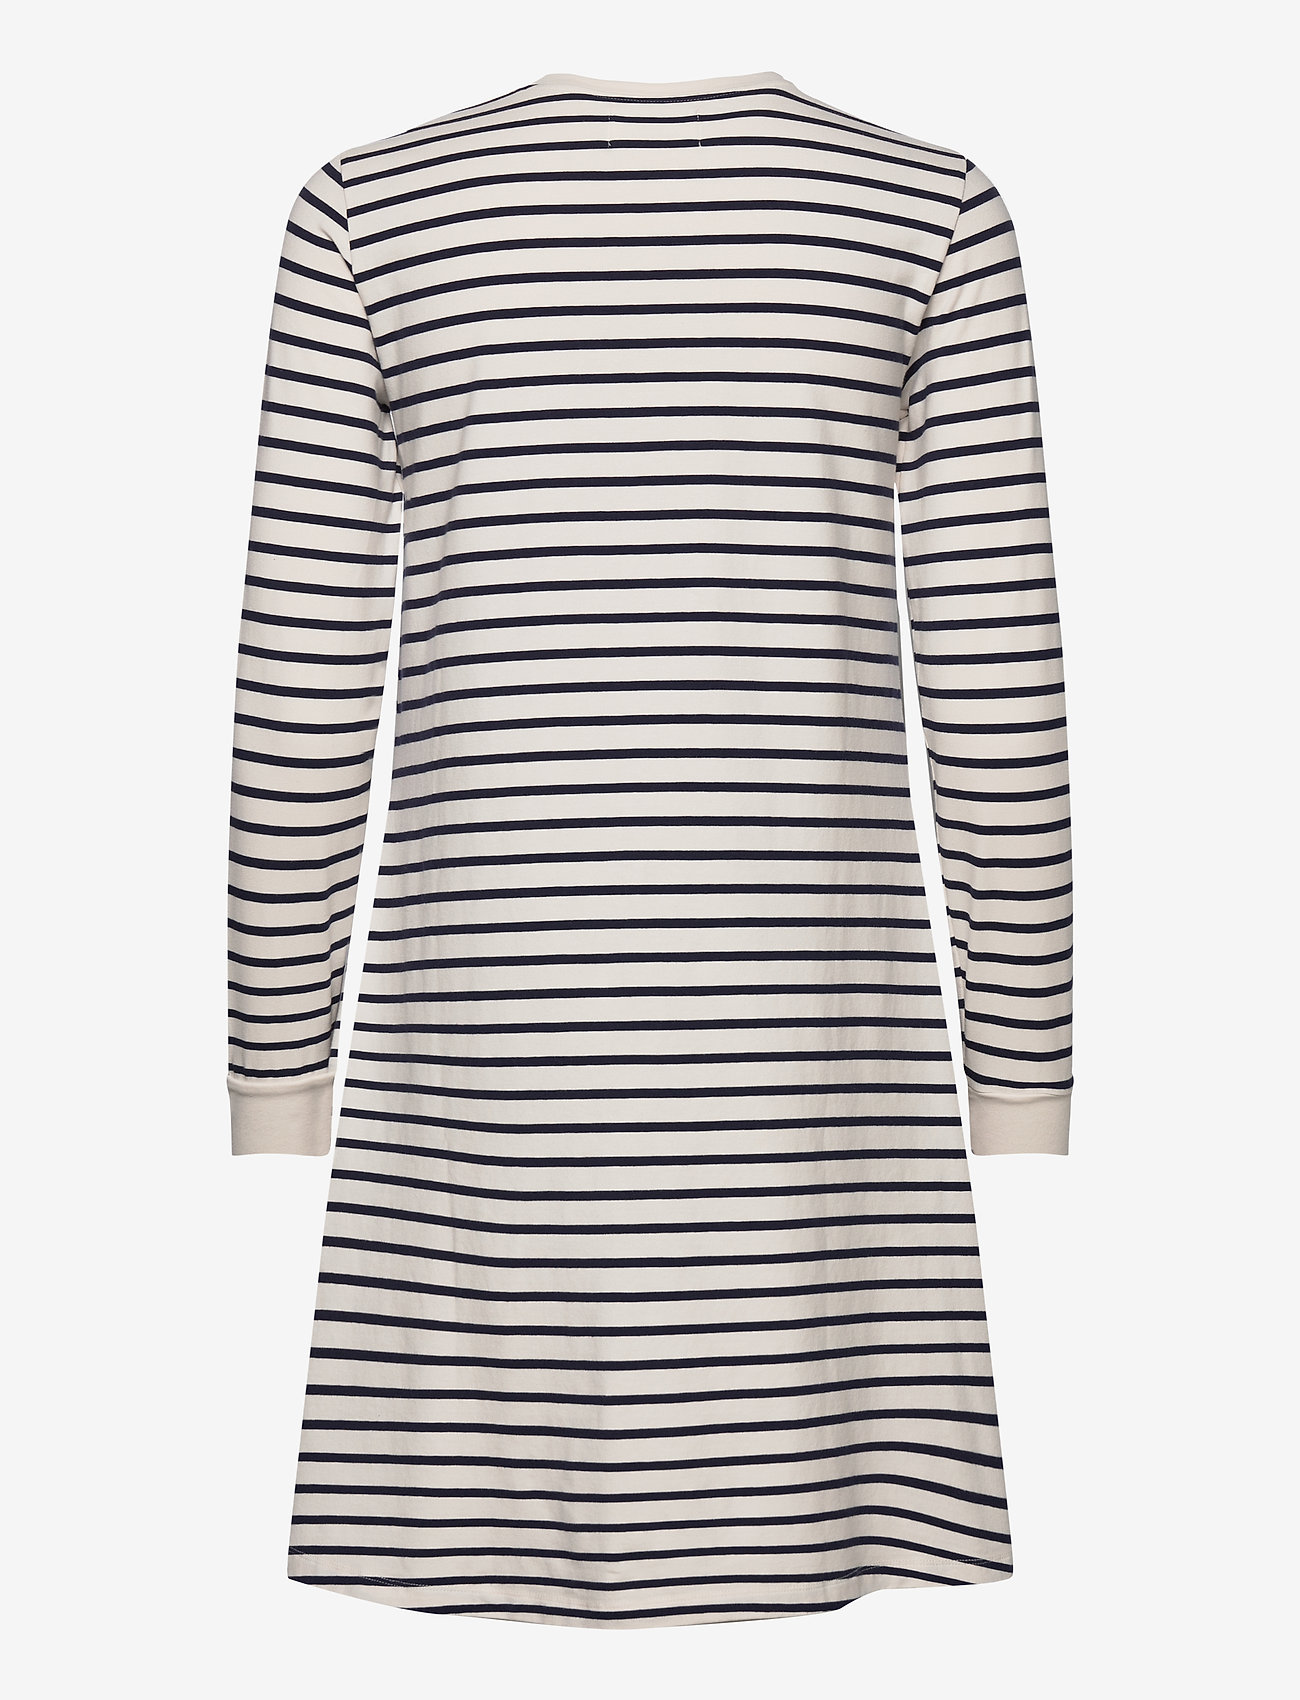 Double A by Wood Wood - Isa dress - sweatshirt dresses - off-white/navy stripes - 1